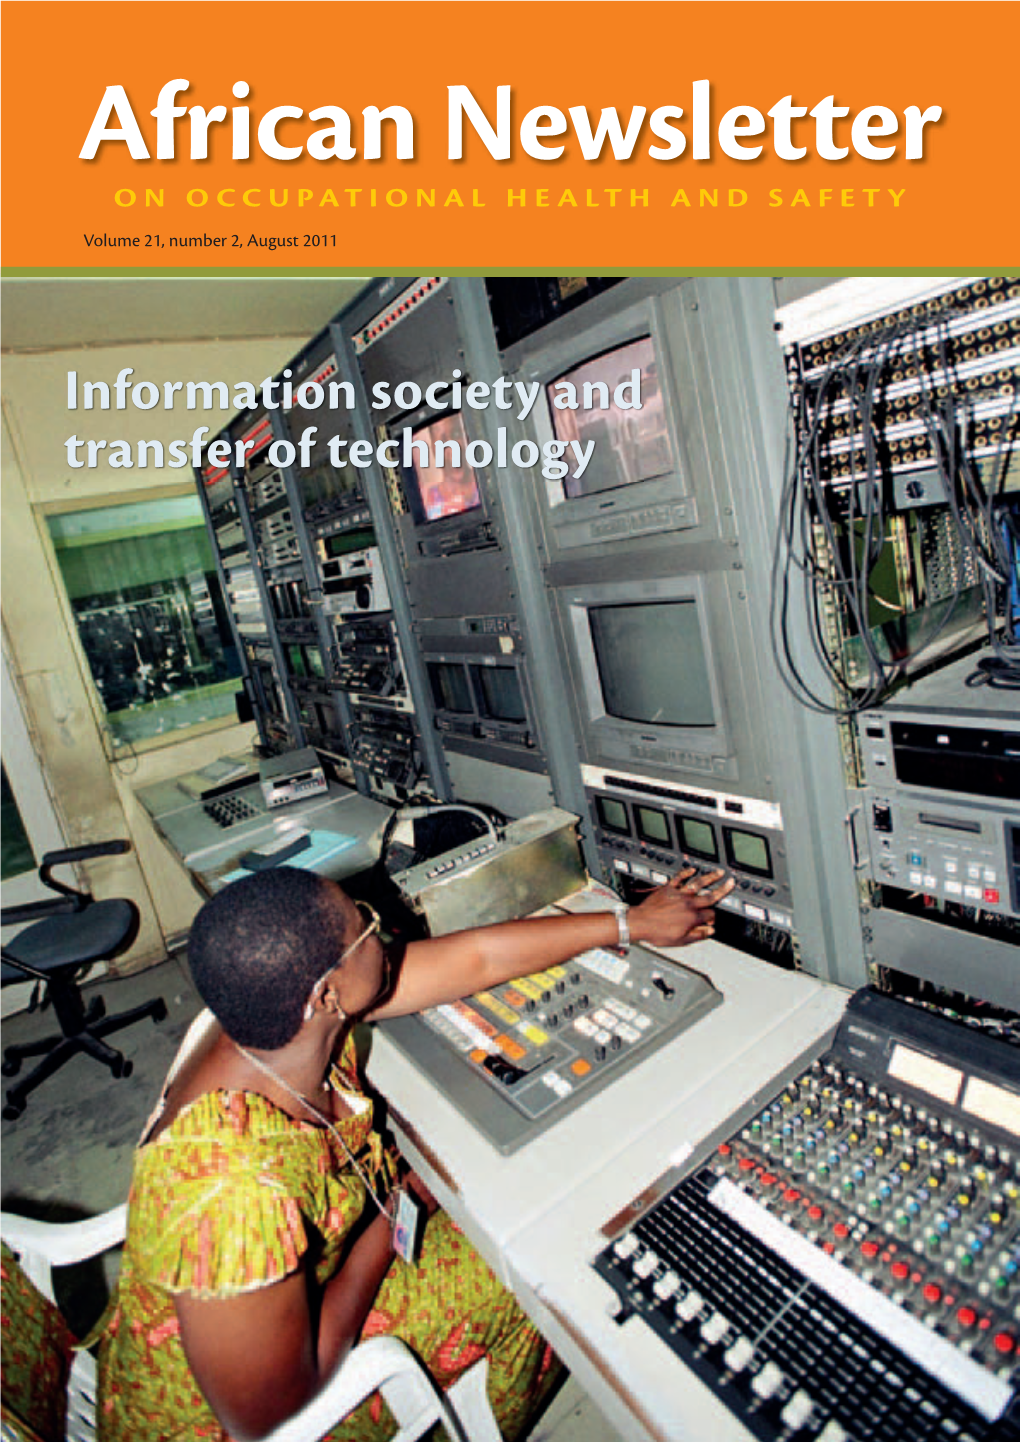 African Newsletter on OCCUPATIONAL HEALTH and SAFETY Volume 21, Number 2, August 2011